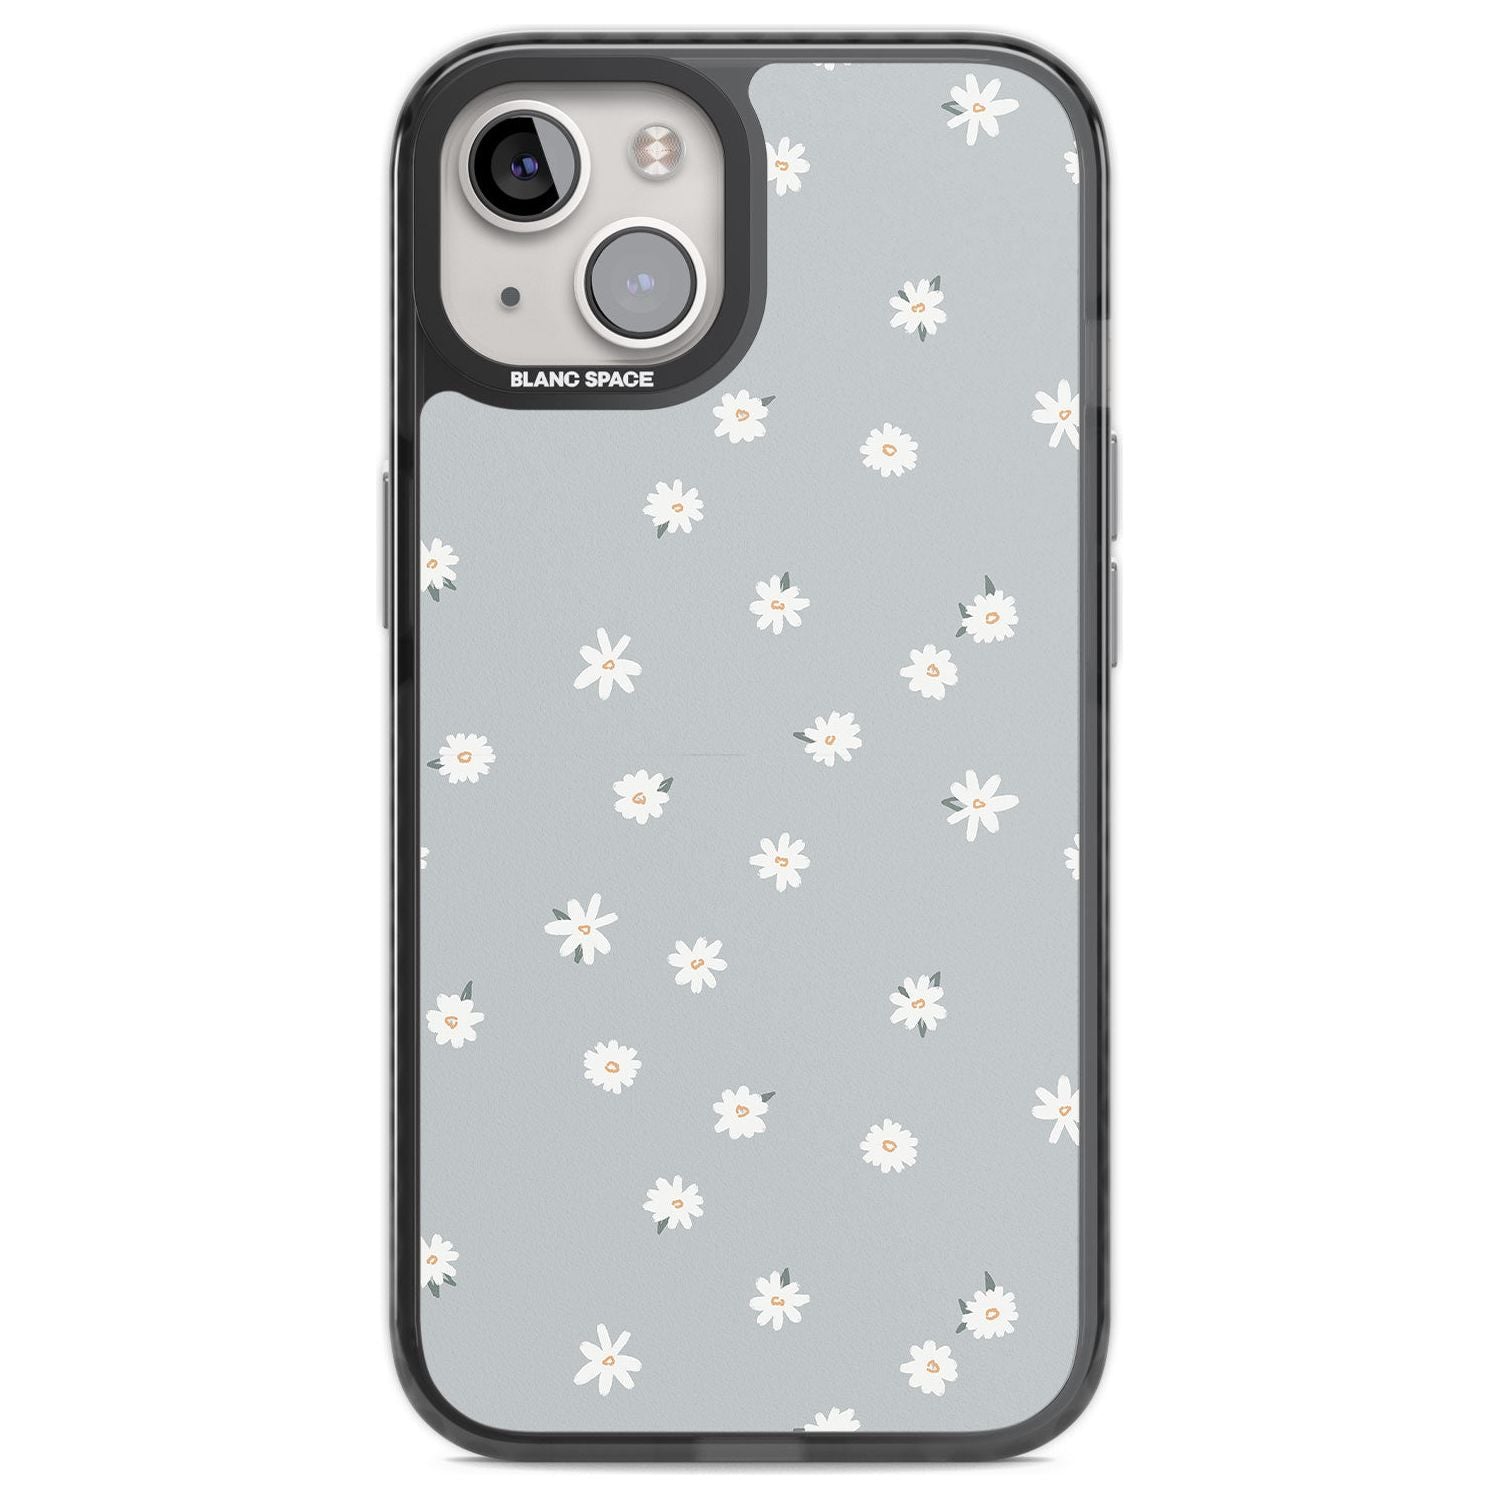 Painted Daisy Blue-Grey Cute Phone Case iPhone 12 / Black Impact Case,iPhone 13 / Black Impact Case,iPhone 12 Pro / Black Impact Case,iPhone 14 / Black Impact Case,iPhone 15 Plus / Black Impact Case,iPhone 15 / Black Impact Case Blanc Space